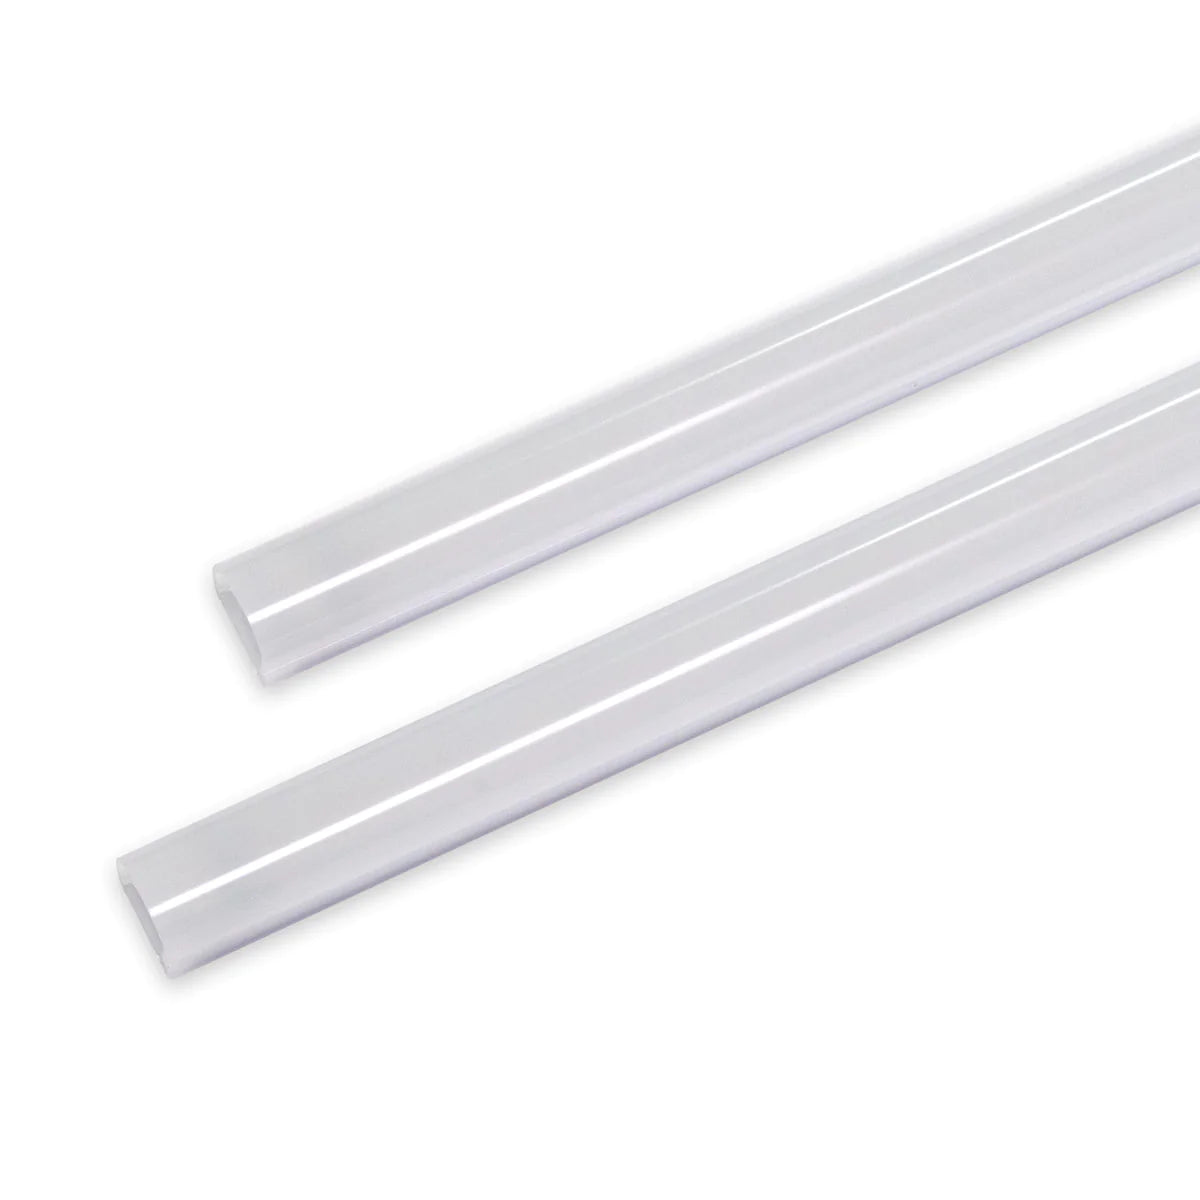 MSK Linear Retrofit Kit with Frosted Lens Cover for 1x4 or 2x2 Fixtures